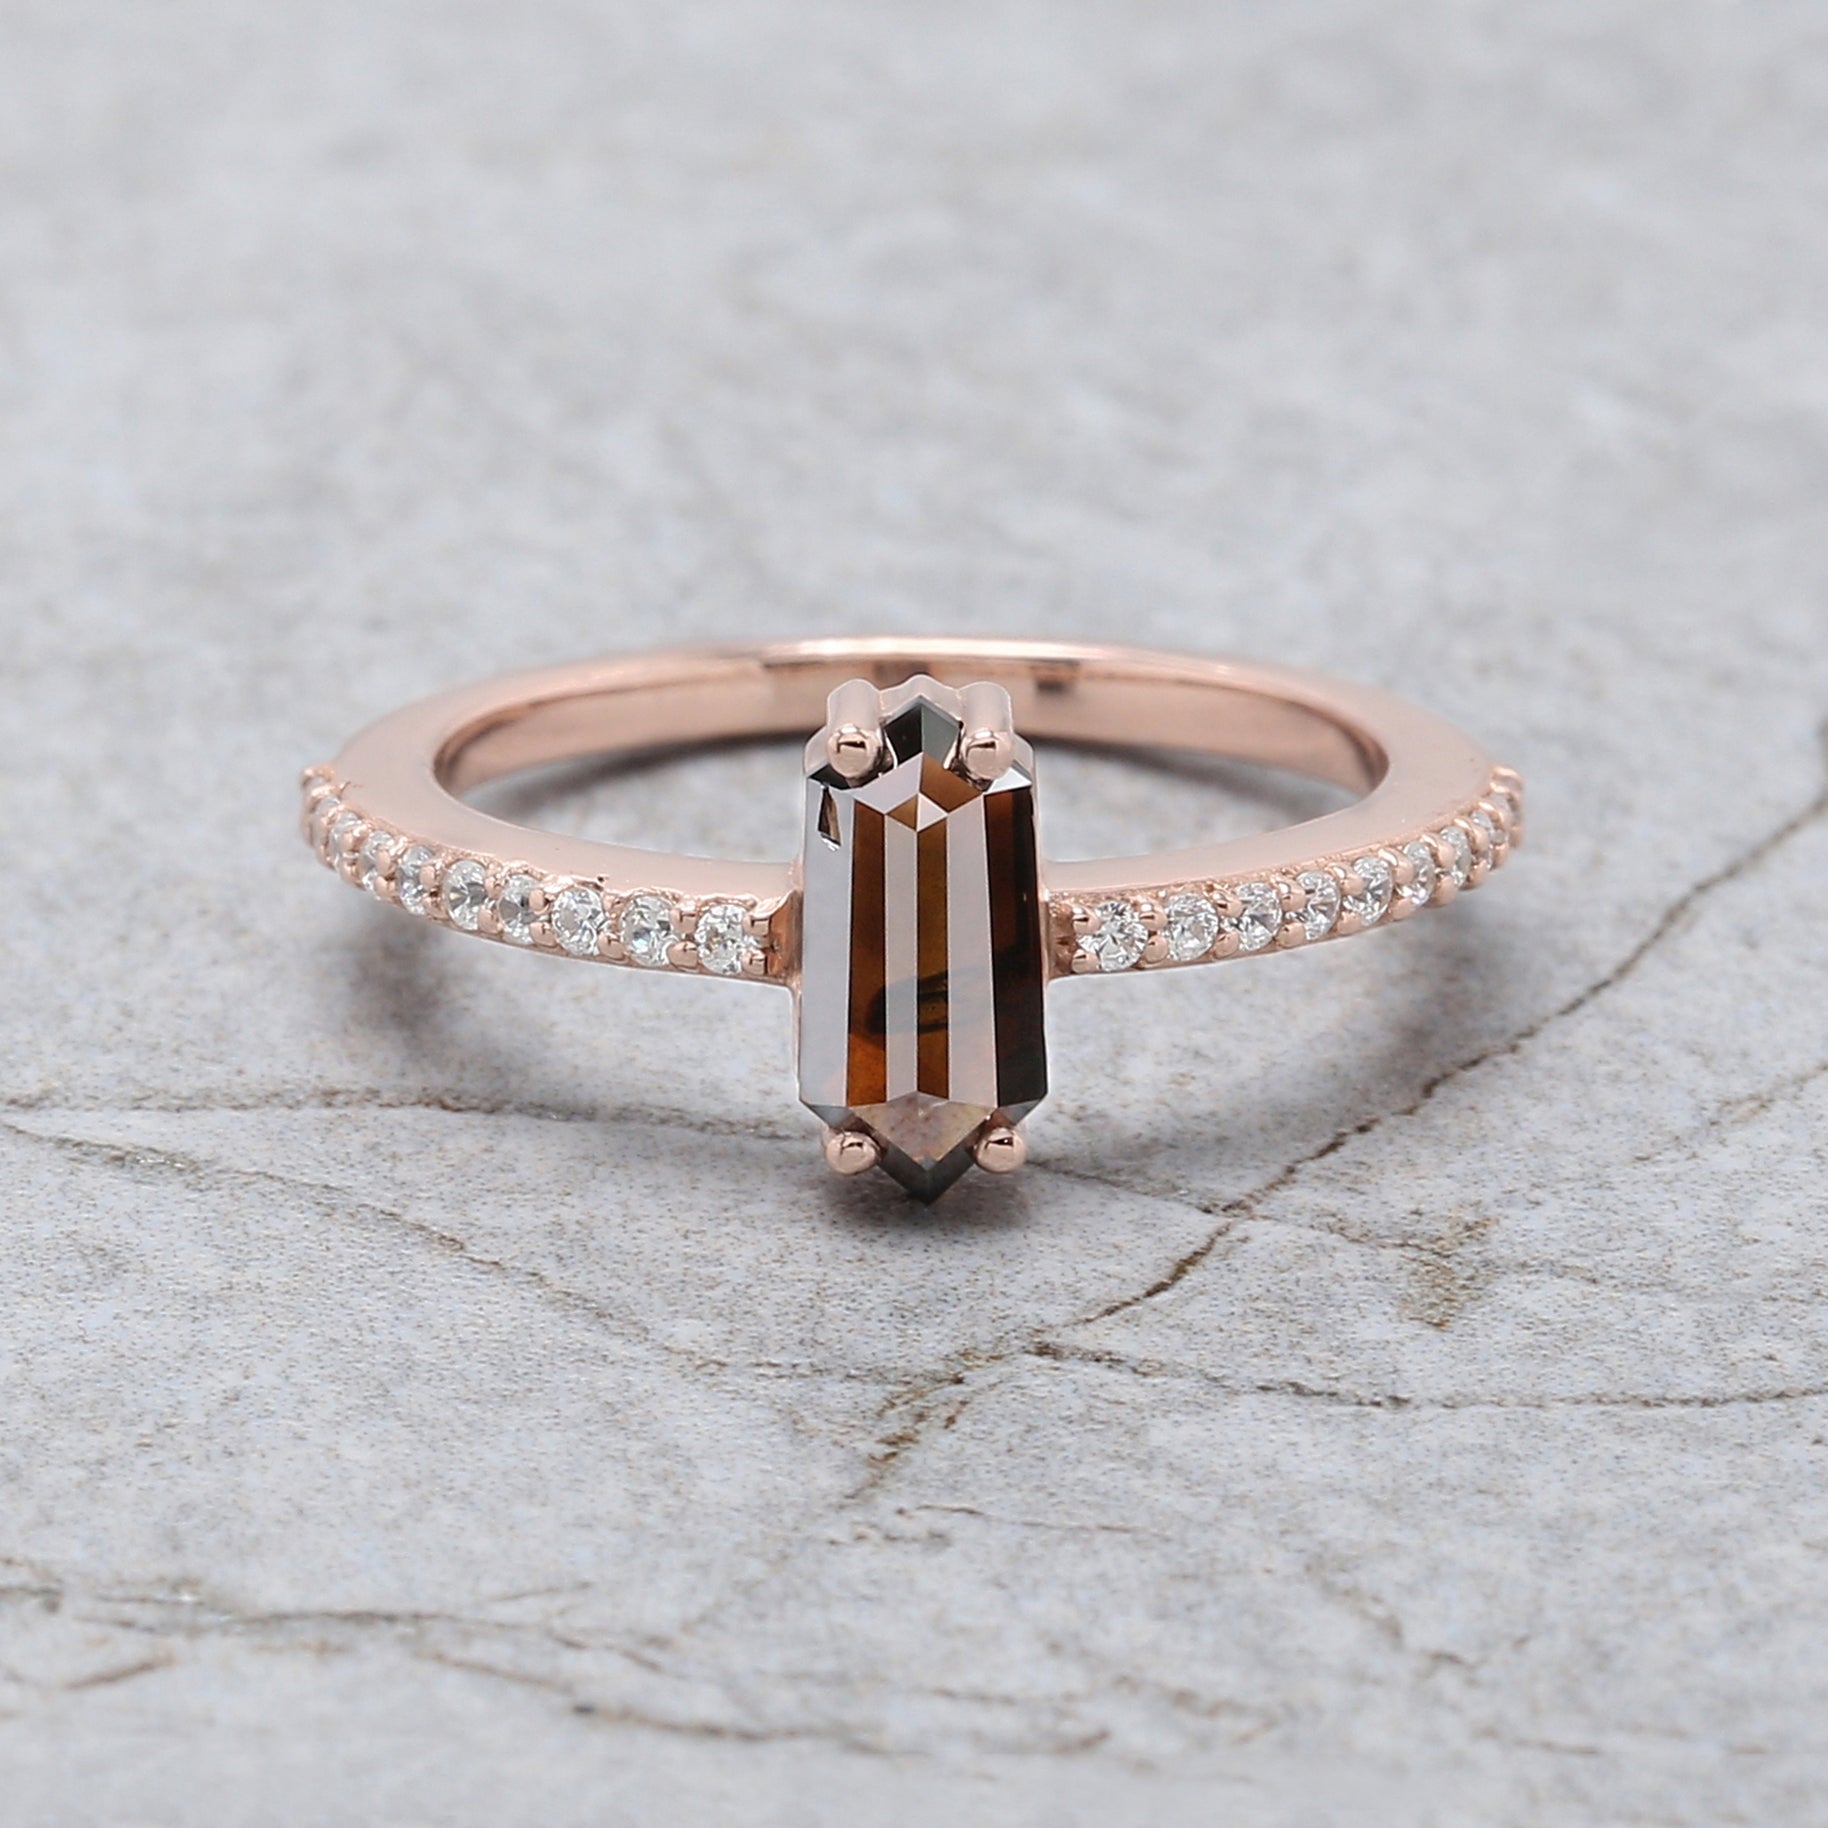 Hexagon Cut Brown Color Diamond Ring 0.80 Ct 8.85 MM Hexagon Diamond Ring 14K Solid Rose Gold Silver Engagement Ring Gift For Her QL1767